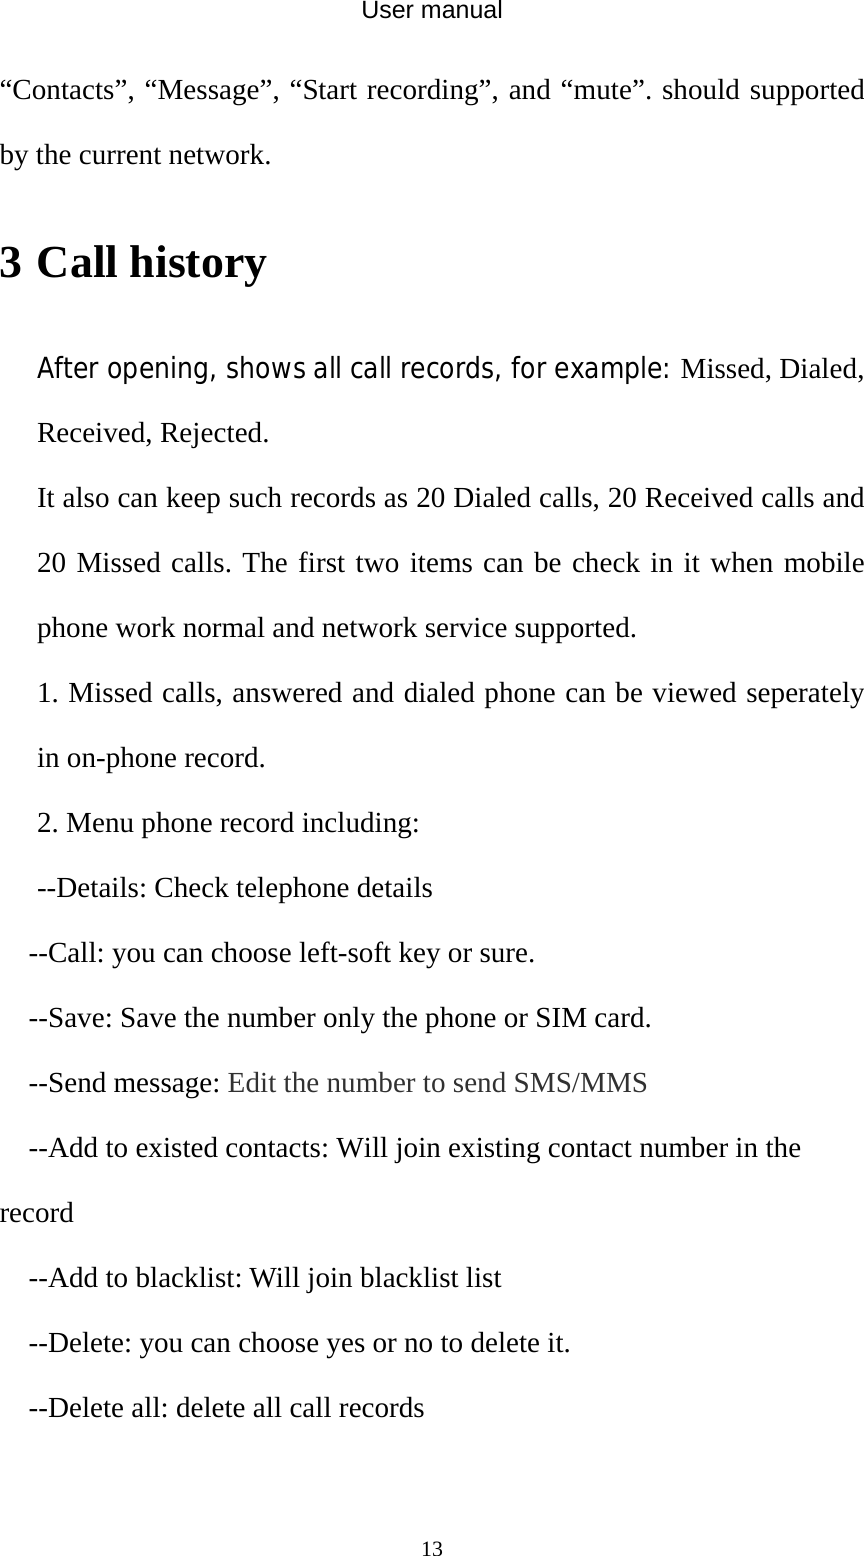 User manual  13“Contacts”, “Message”, “Start recording”, and “mute”. should supported by the current network. 3 Call history After opening, shows all call records, for example: Missed, Dialed, Received, Rejected. It also can keep such records as 20 Dialed calls, 20 Received calls and 20 Missed calls. The first two items can be check in it when mobile phone work normal and network service supported. 1. Missed calls, answered and dialed phone can be viewed seperately in on-phone record. 2. Menu phone record including: --Details: Check telephone details --Call: you can choose left-soft key or sure. --Save: Save the number only the phone or SIM card. --Send message: Edit the number to send SMS/MMS --Add to existed contacts: Will join existing contact number in the record --Add to blacklist: Will join blacklist list --Delete: you can choose yes or no to delete it. --Delete all: delete all call records  